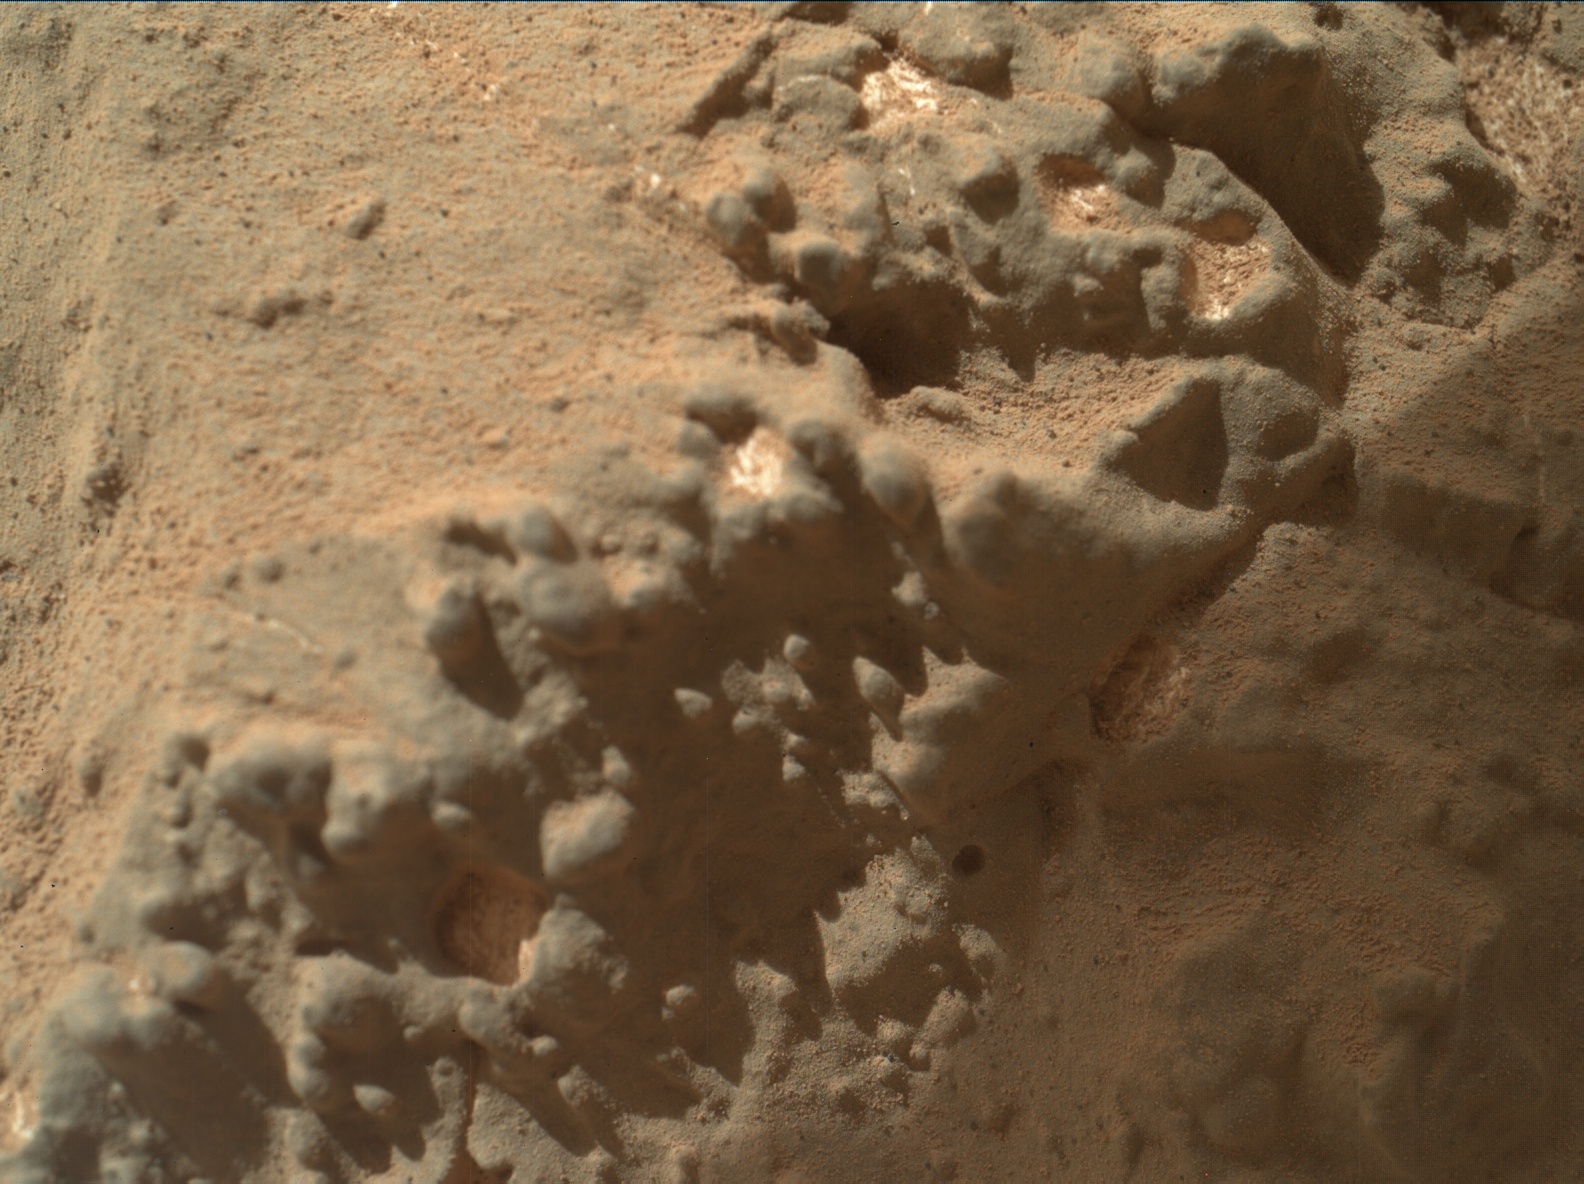 Nasa's Mars rover Curiosity acquired this image using its Mars Hand Lens Imager (MAHLI) on Sol 154